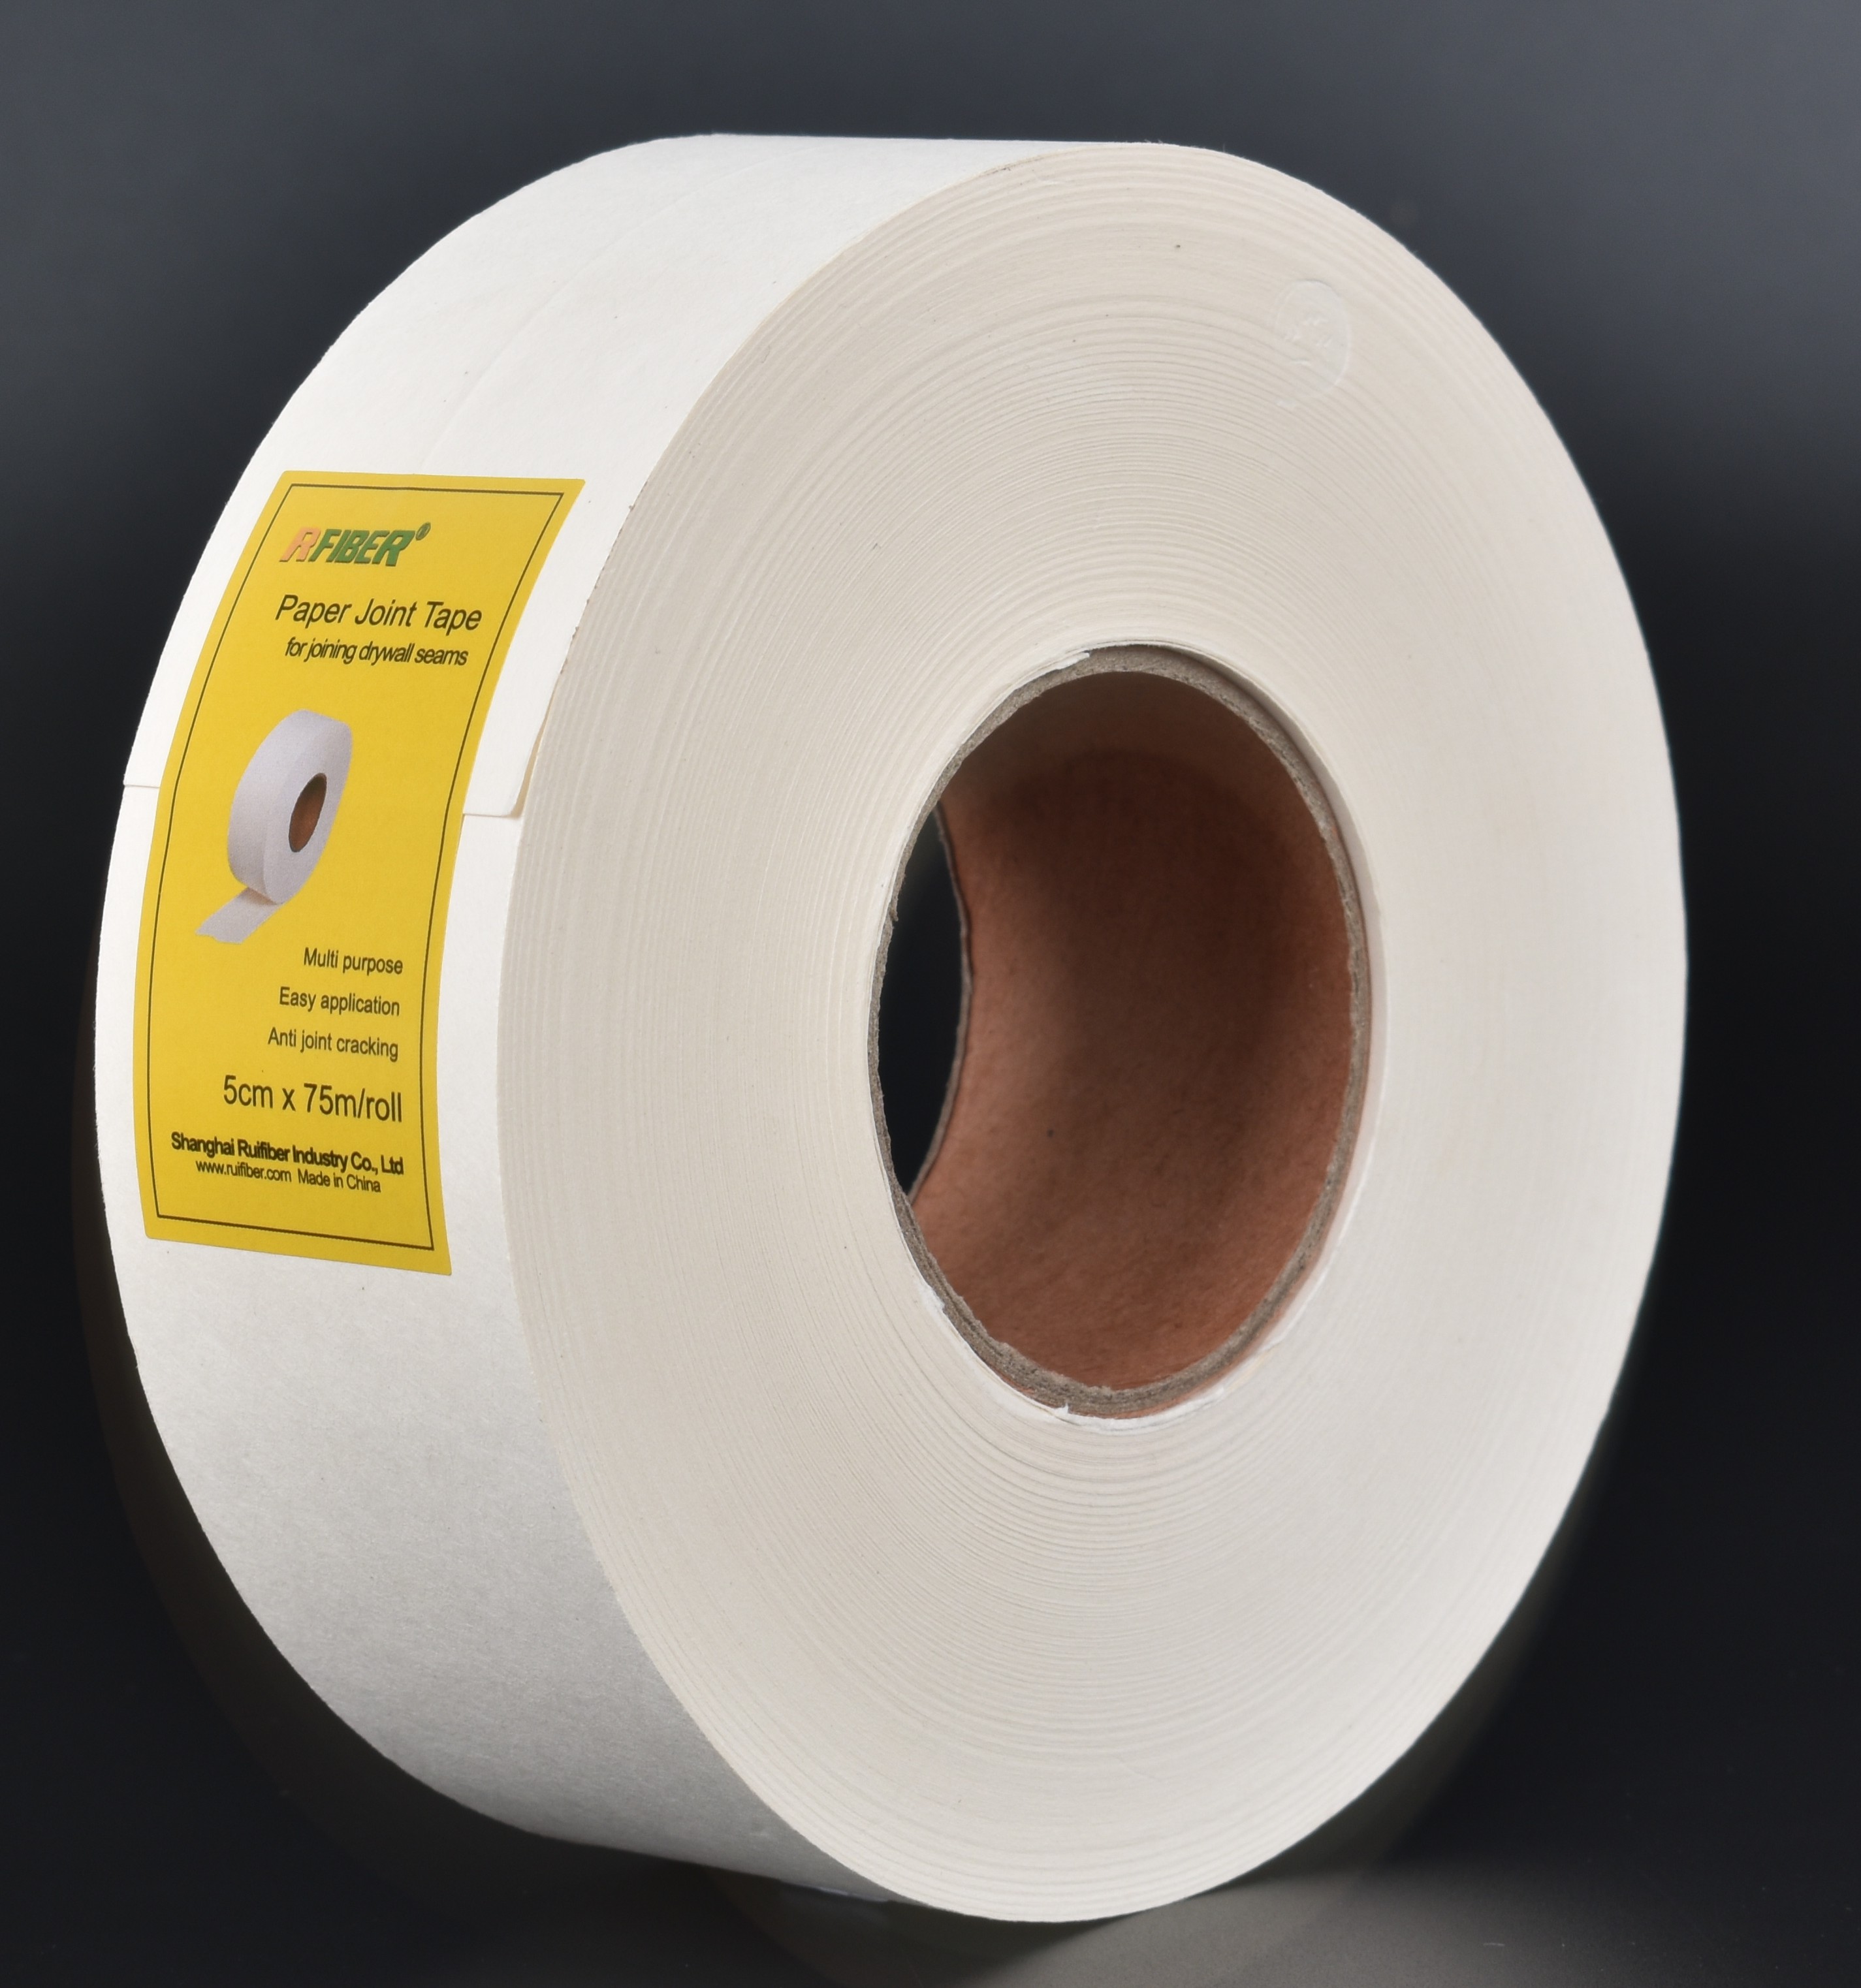 Cur utere charta Tape in Drywall?Featured Image